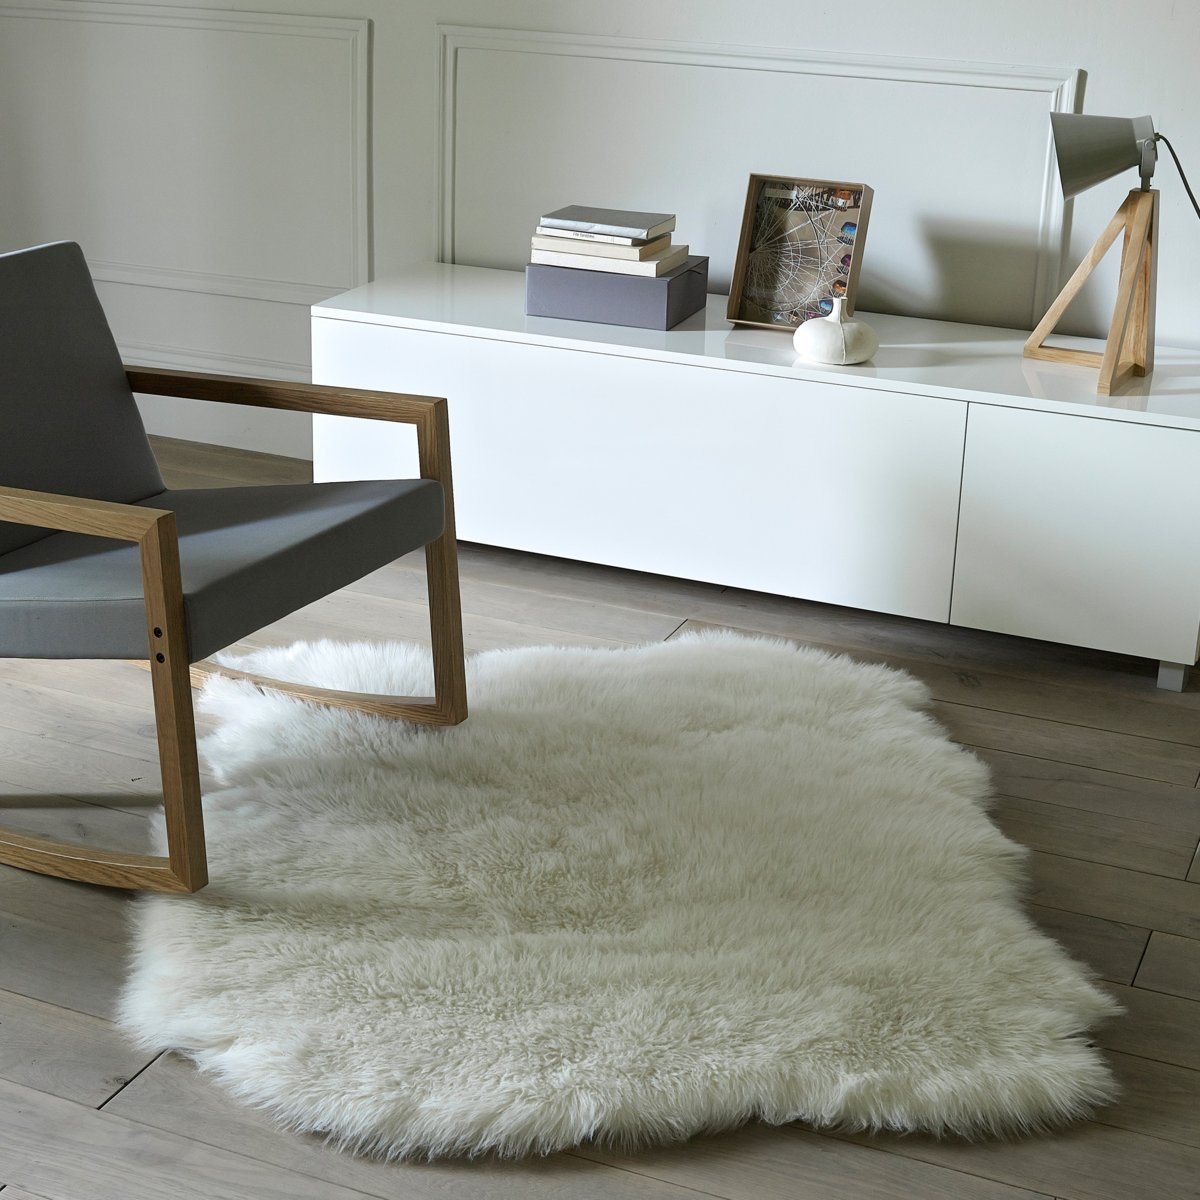 tapis fausse fourrure ambiance cocooning hiver meuble scandinave - blog déco - clemaroundthecorner